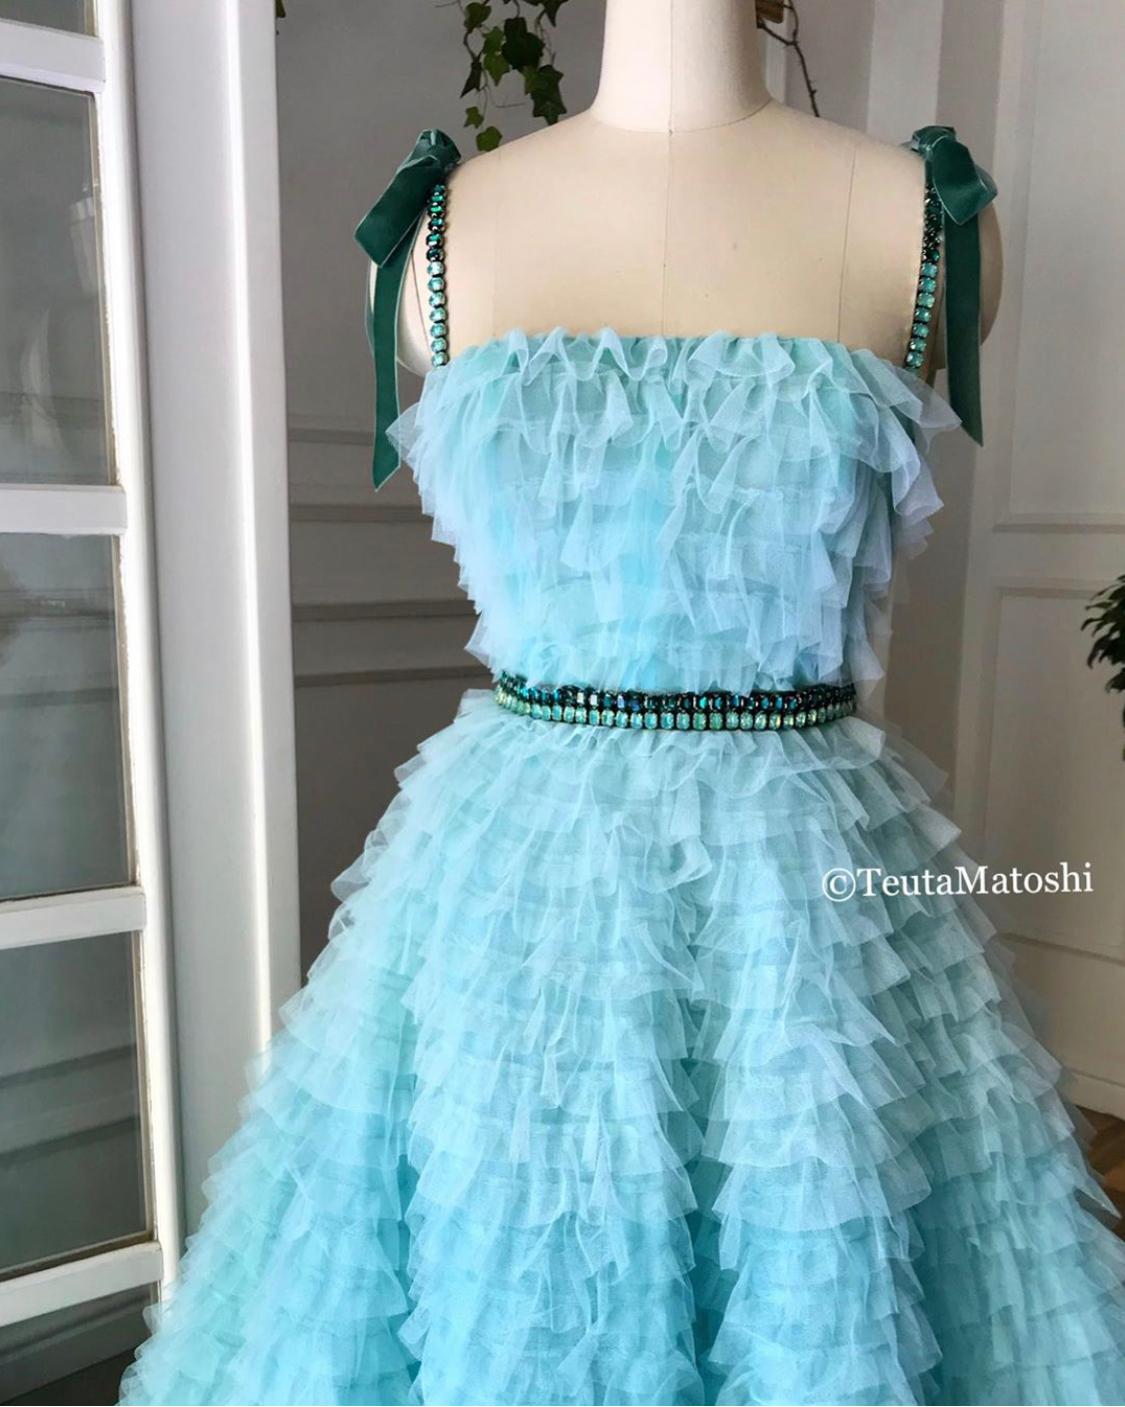 Blue A-Line dress with spaghetti straps and embroidery